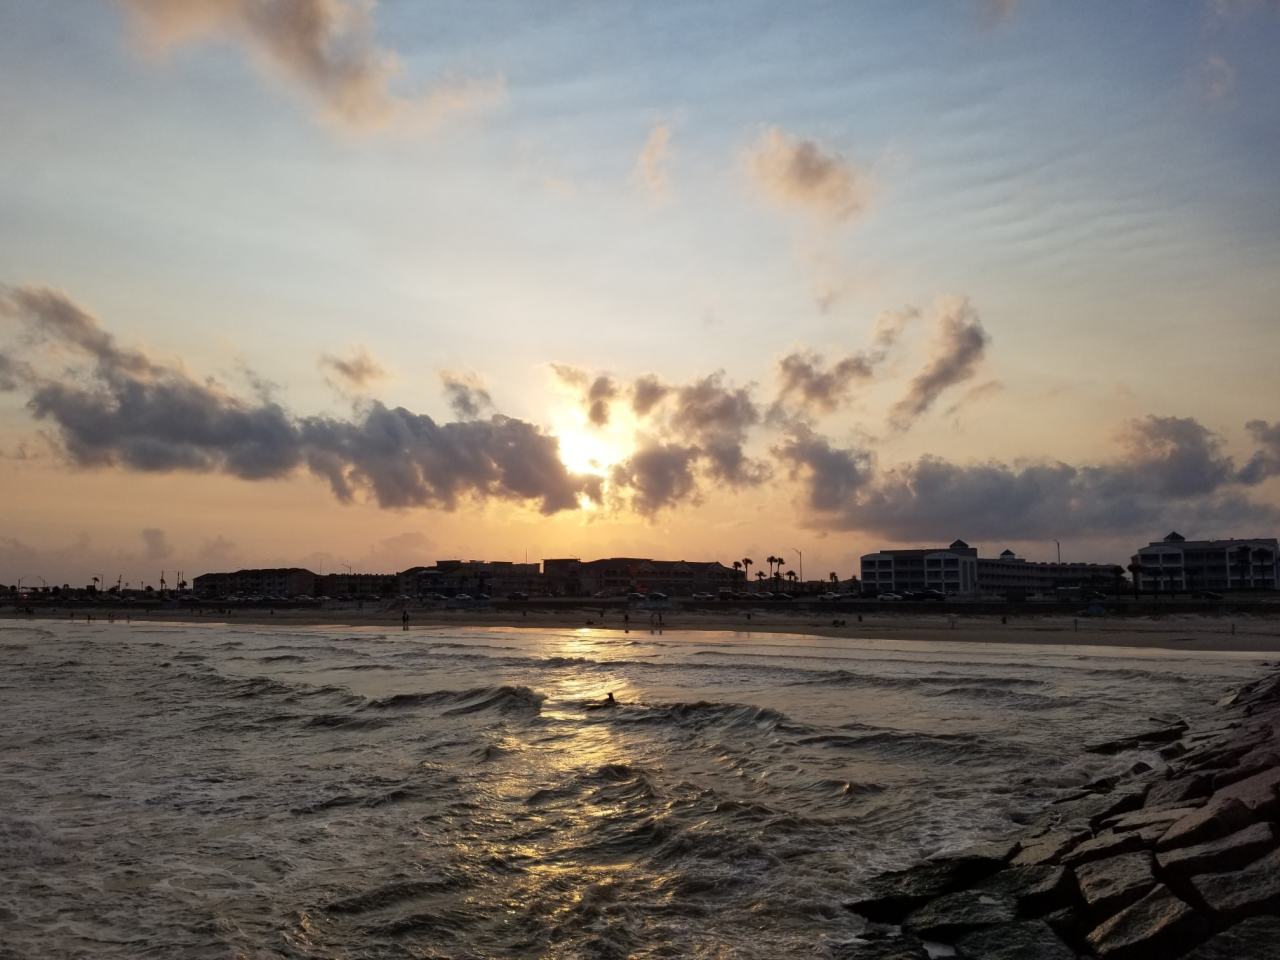 Still have time to get to our Observation deck and see an amazing Galveston Sunset!! #61stpier #sunset #lovegalveston #galvestonchamber https://ift.tt/2uL3pHv #61stpier#Galveston#TX#Texas#Gulfofmexico#fishing#pier#pierlife#dock